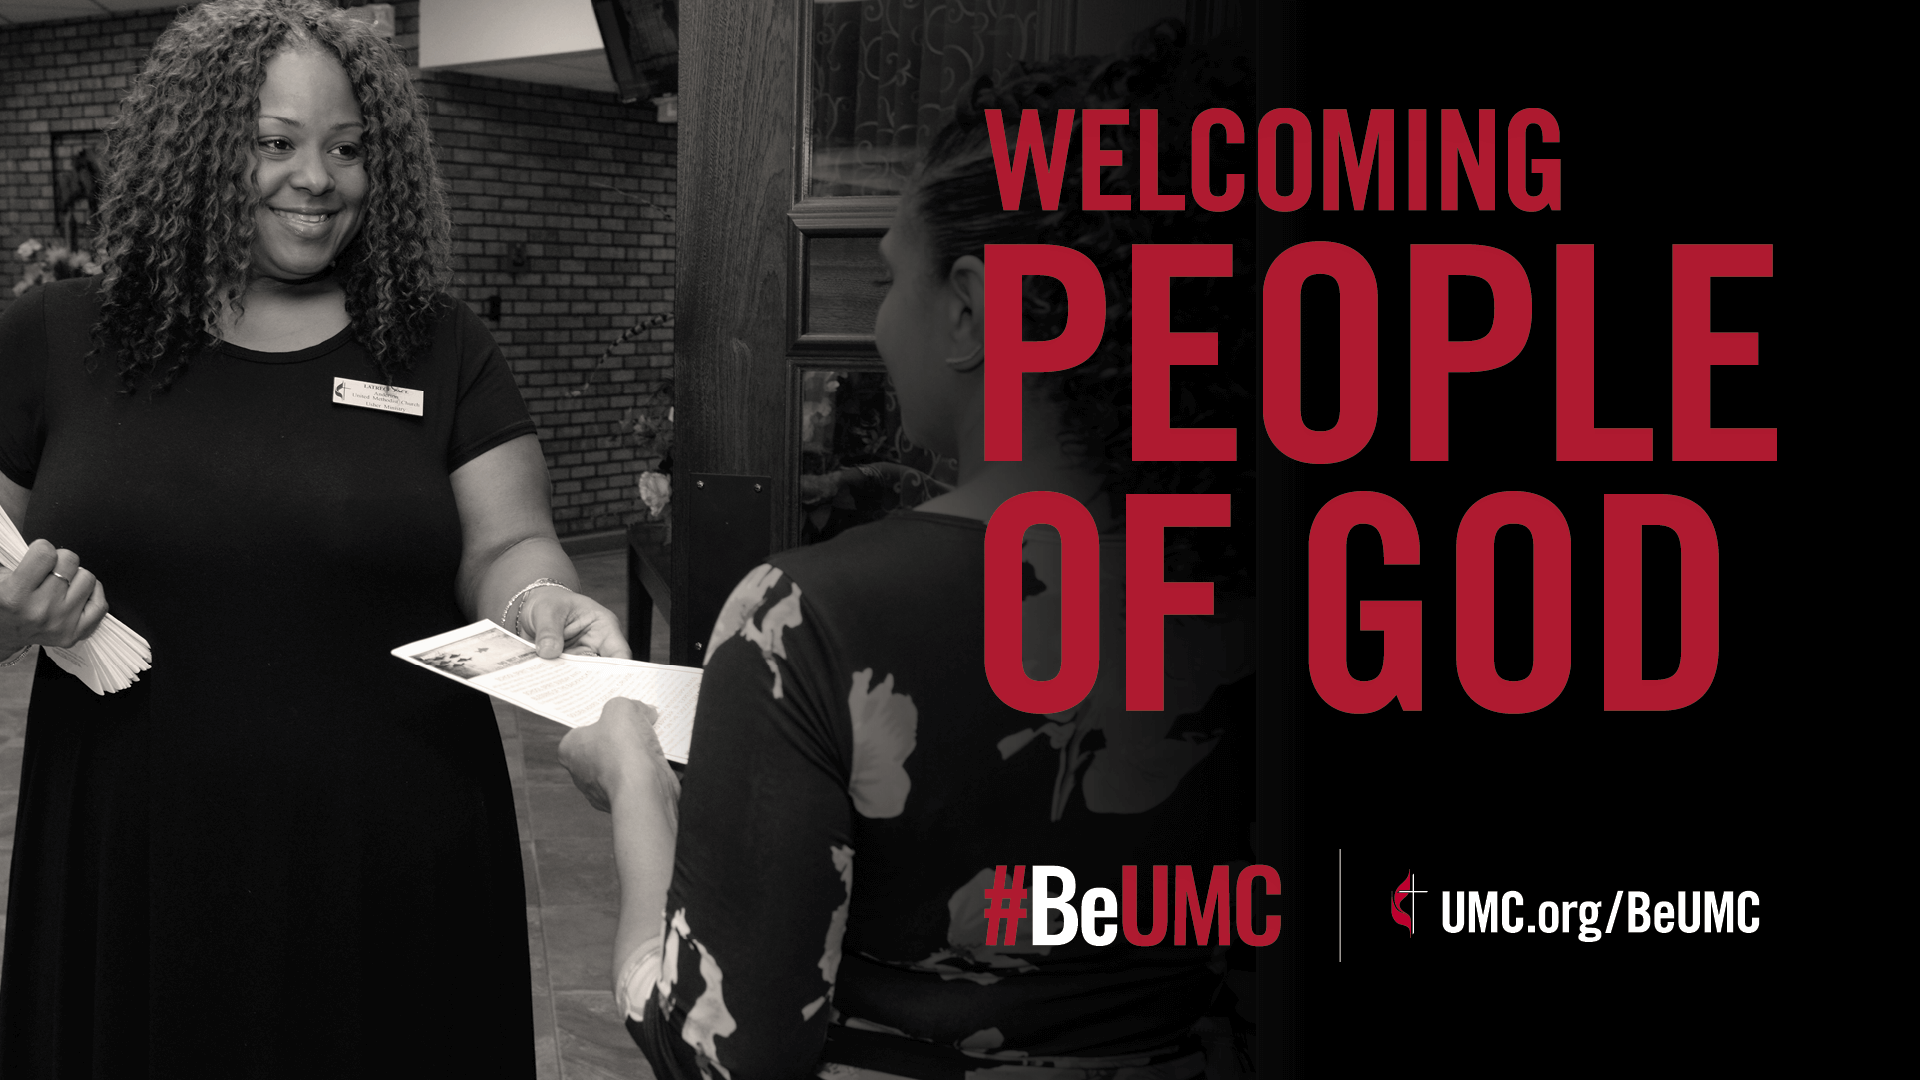 The #BeUMC campaign reminds us of who we are at our best. As people of God called The United Methodist Church, we’re faithful followers of Jesus seeking to make the world a better place. Welcoming/Greet worship image.